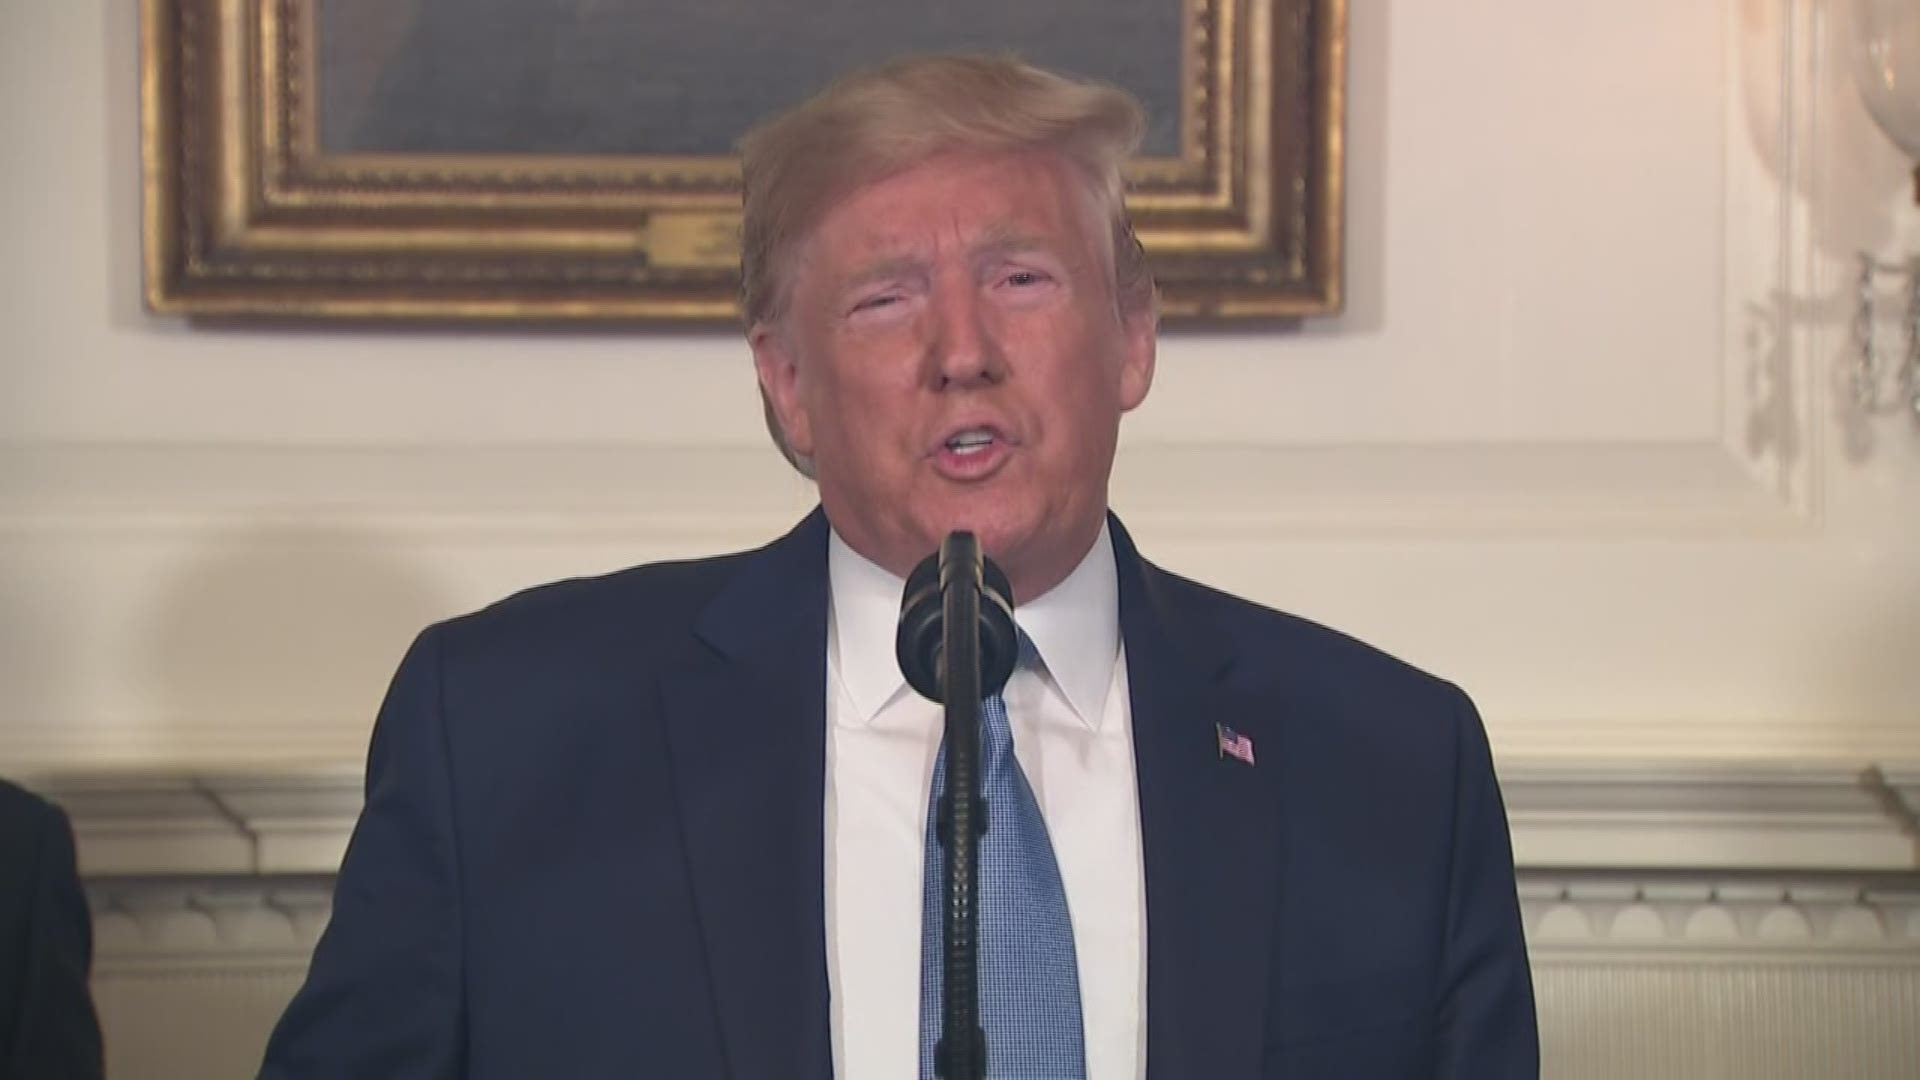 Trump gave a speech from the White House on Monday following weekend shootings in El Paso, Texas, and Dayton, Ohio, that left 29 people dead and dozens wounded. He called the shootings 'barbaric slaughters.'